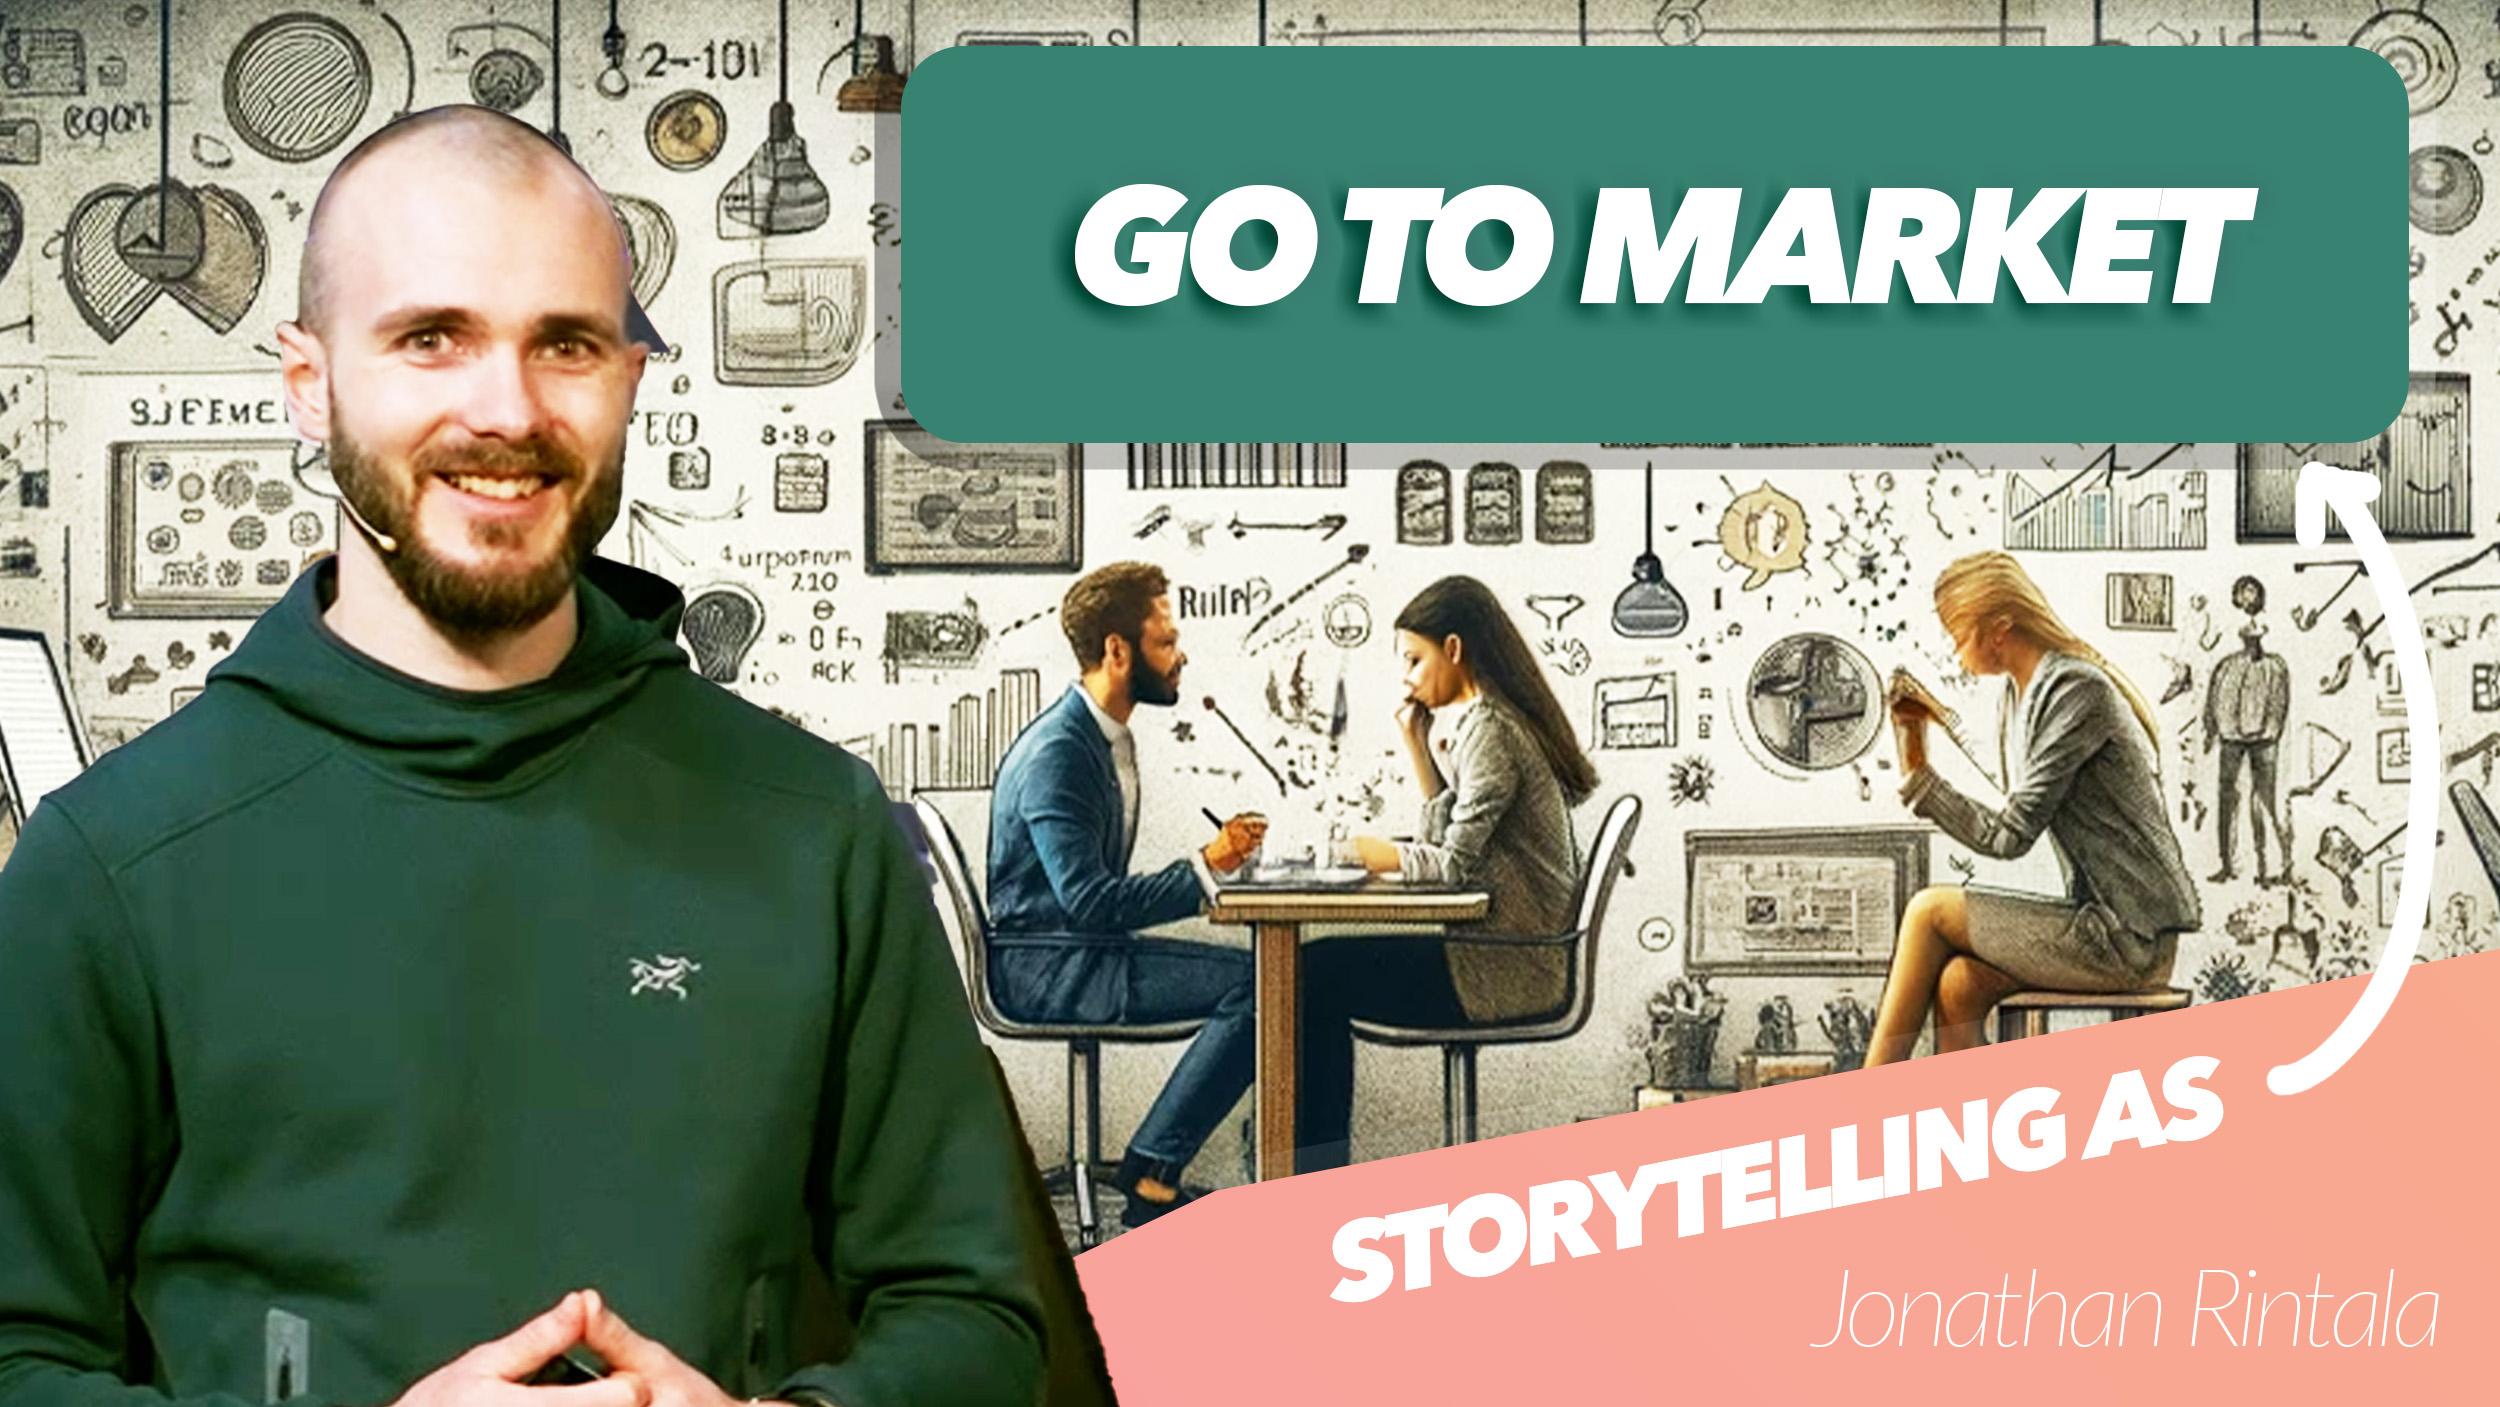 Storytelling as go to market strategy for startup